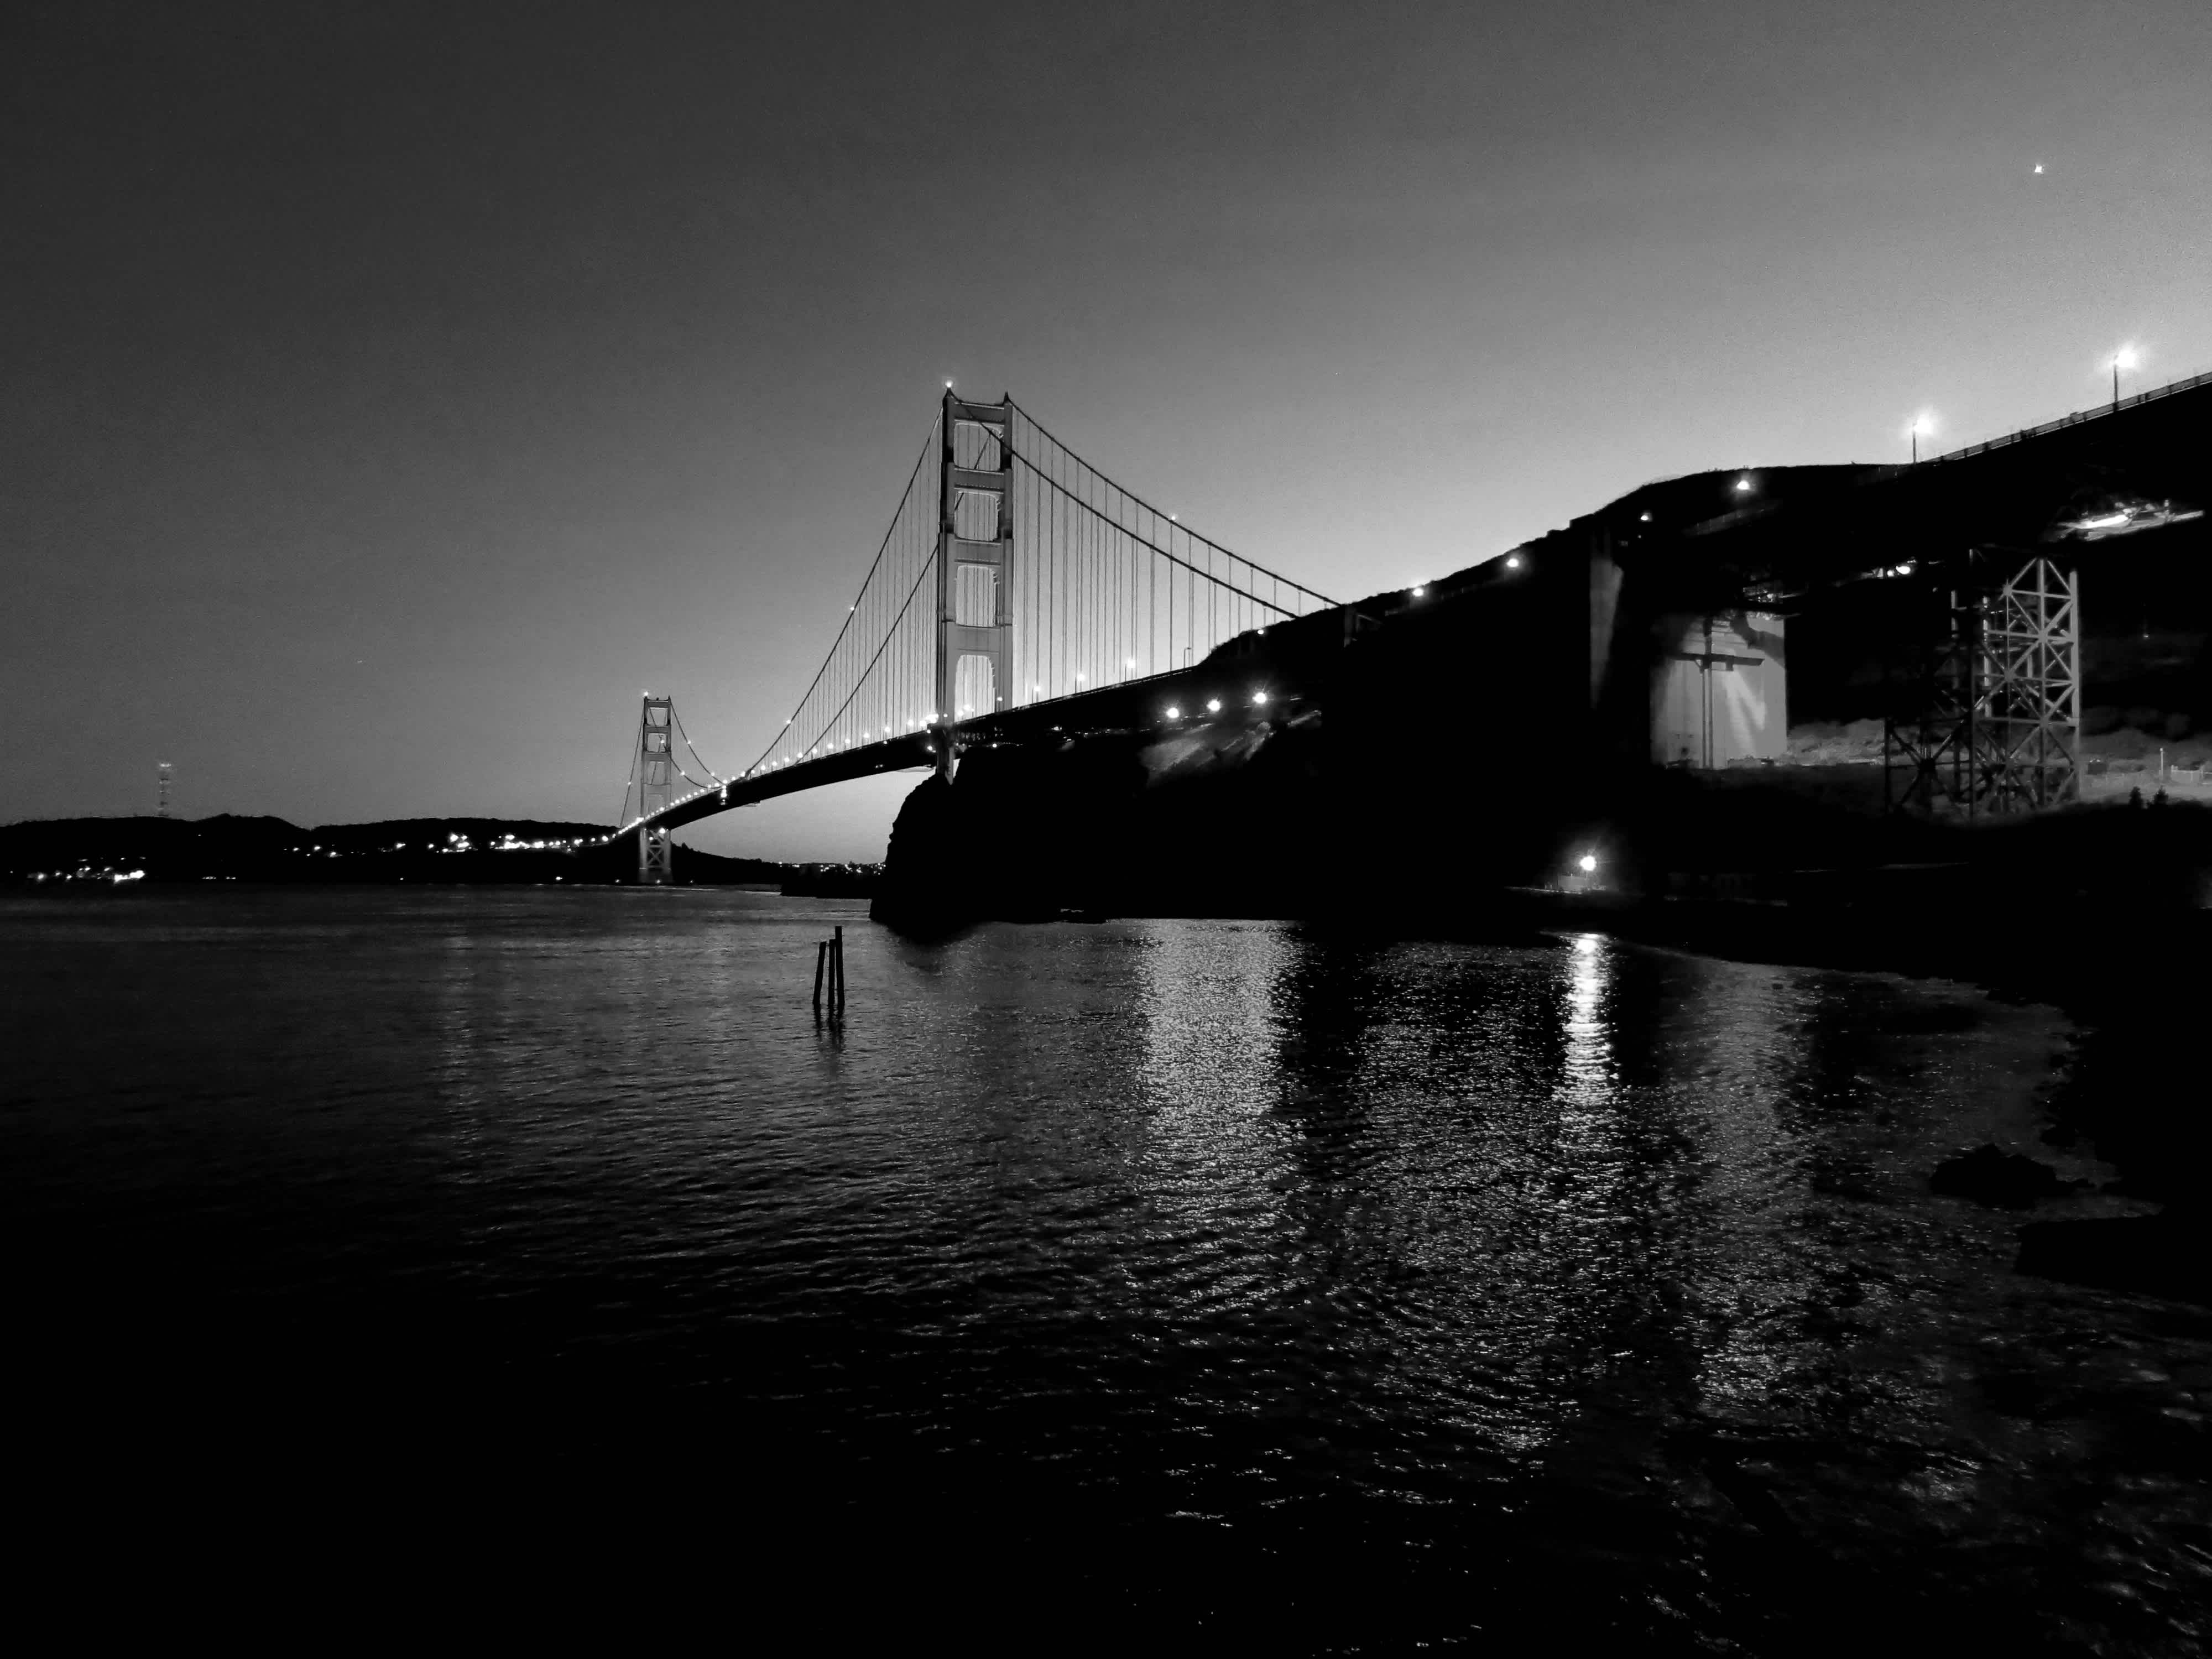 Golden Gate bridge with city reflected in the water in black and white in Golden Gate Bridge, San Francisco, California.